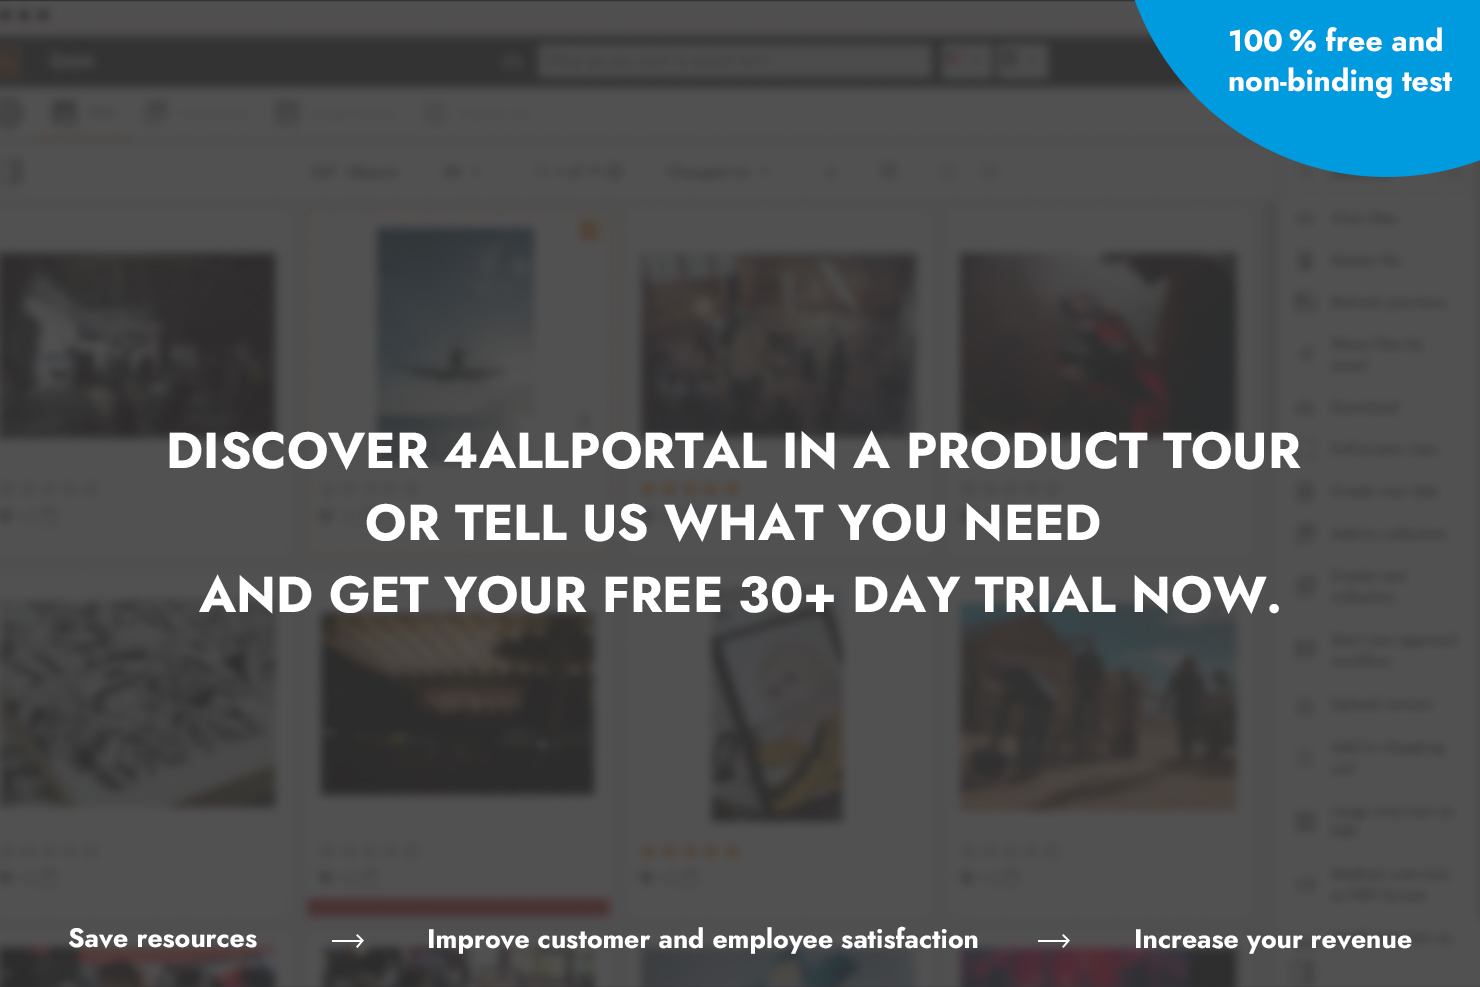 Start now with a product tour or send us your requirements and receive a 30+ day trial!